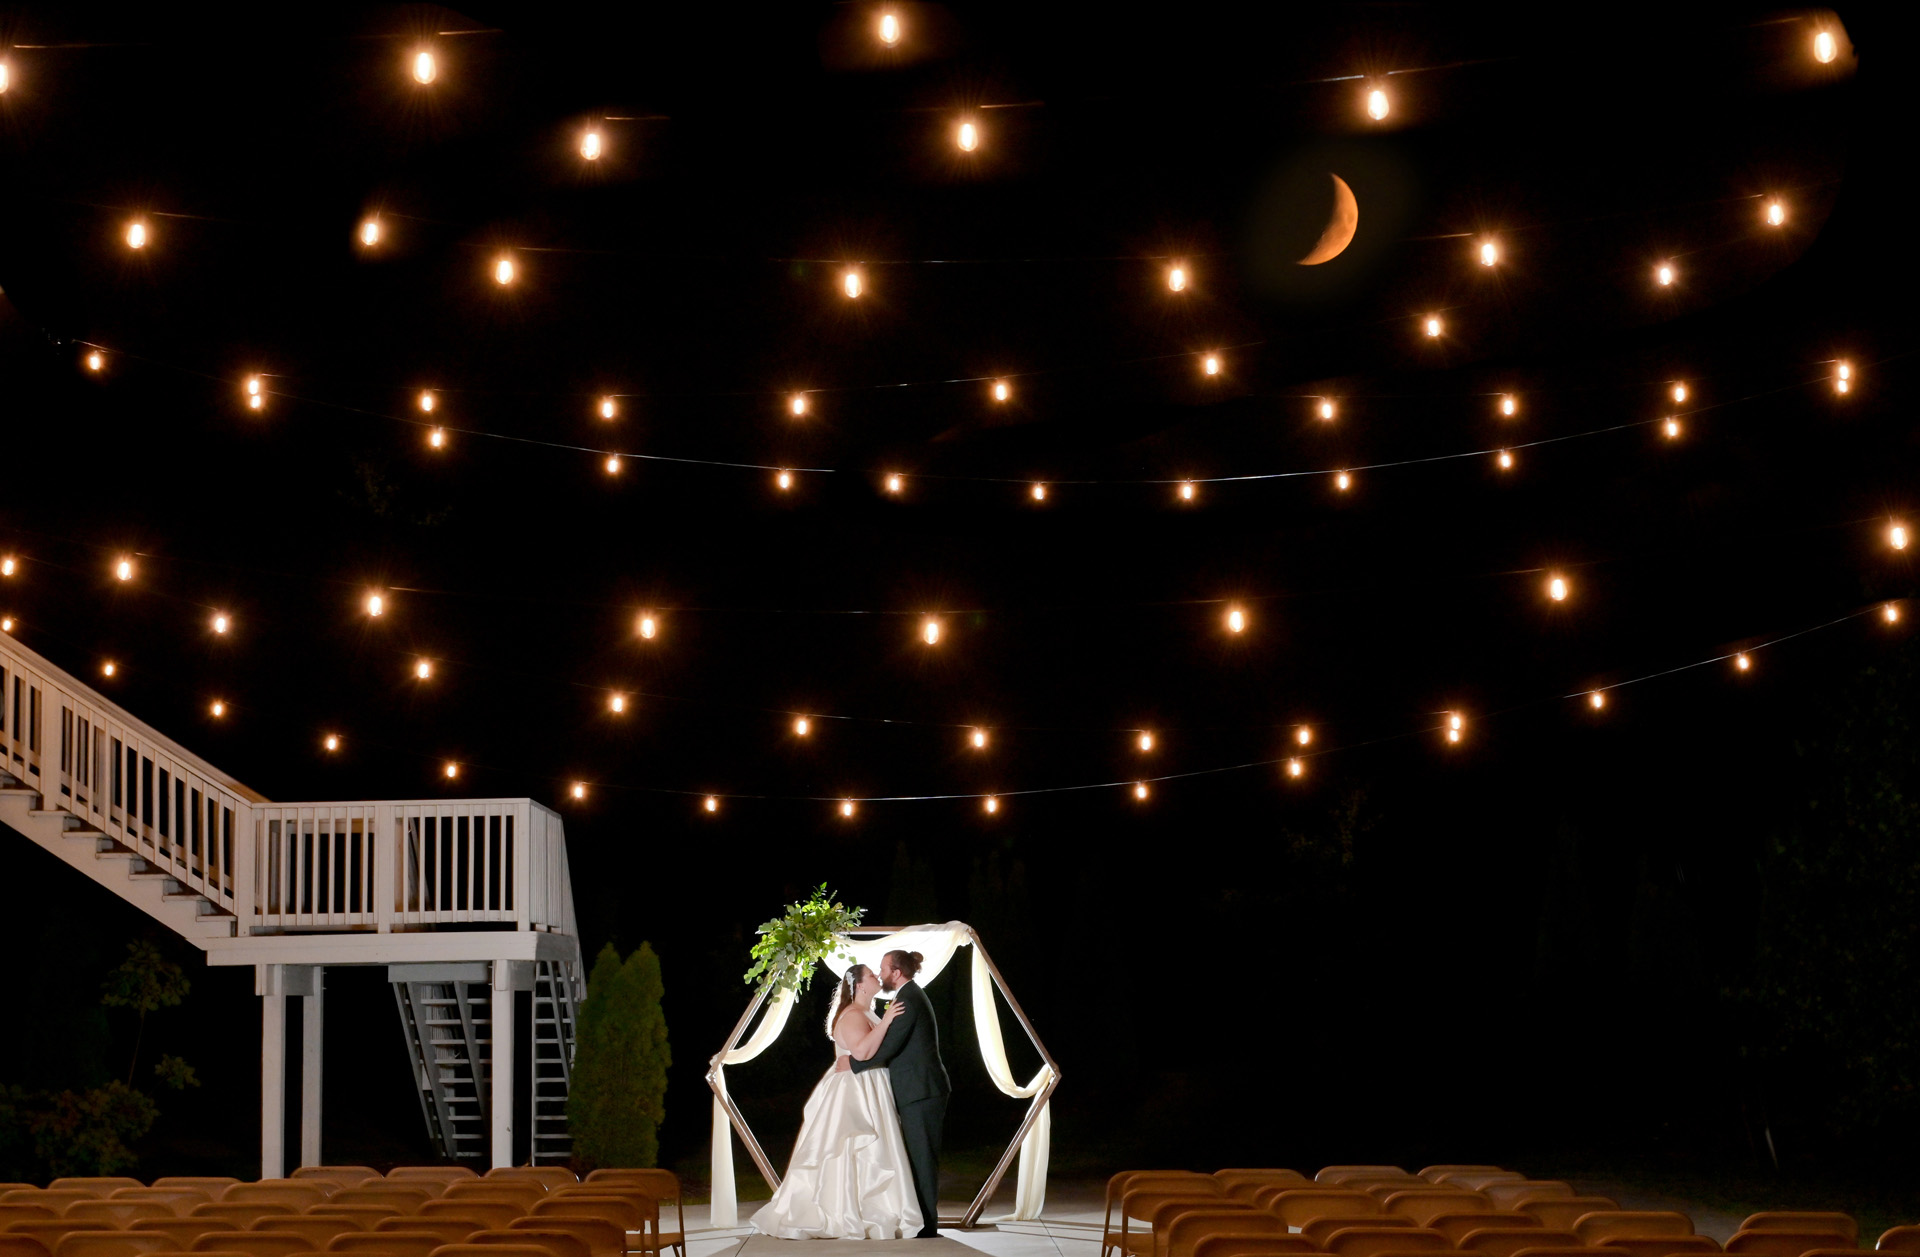 The bride and groom pose for a cool photo with a rising half moon in this fantasy epic wedding portraits at the Captain's Club at Woodfield in Grand Blanc, Michigan.